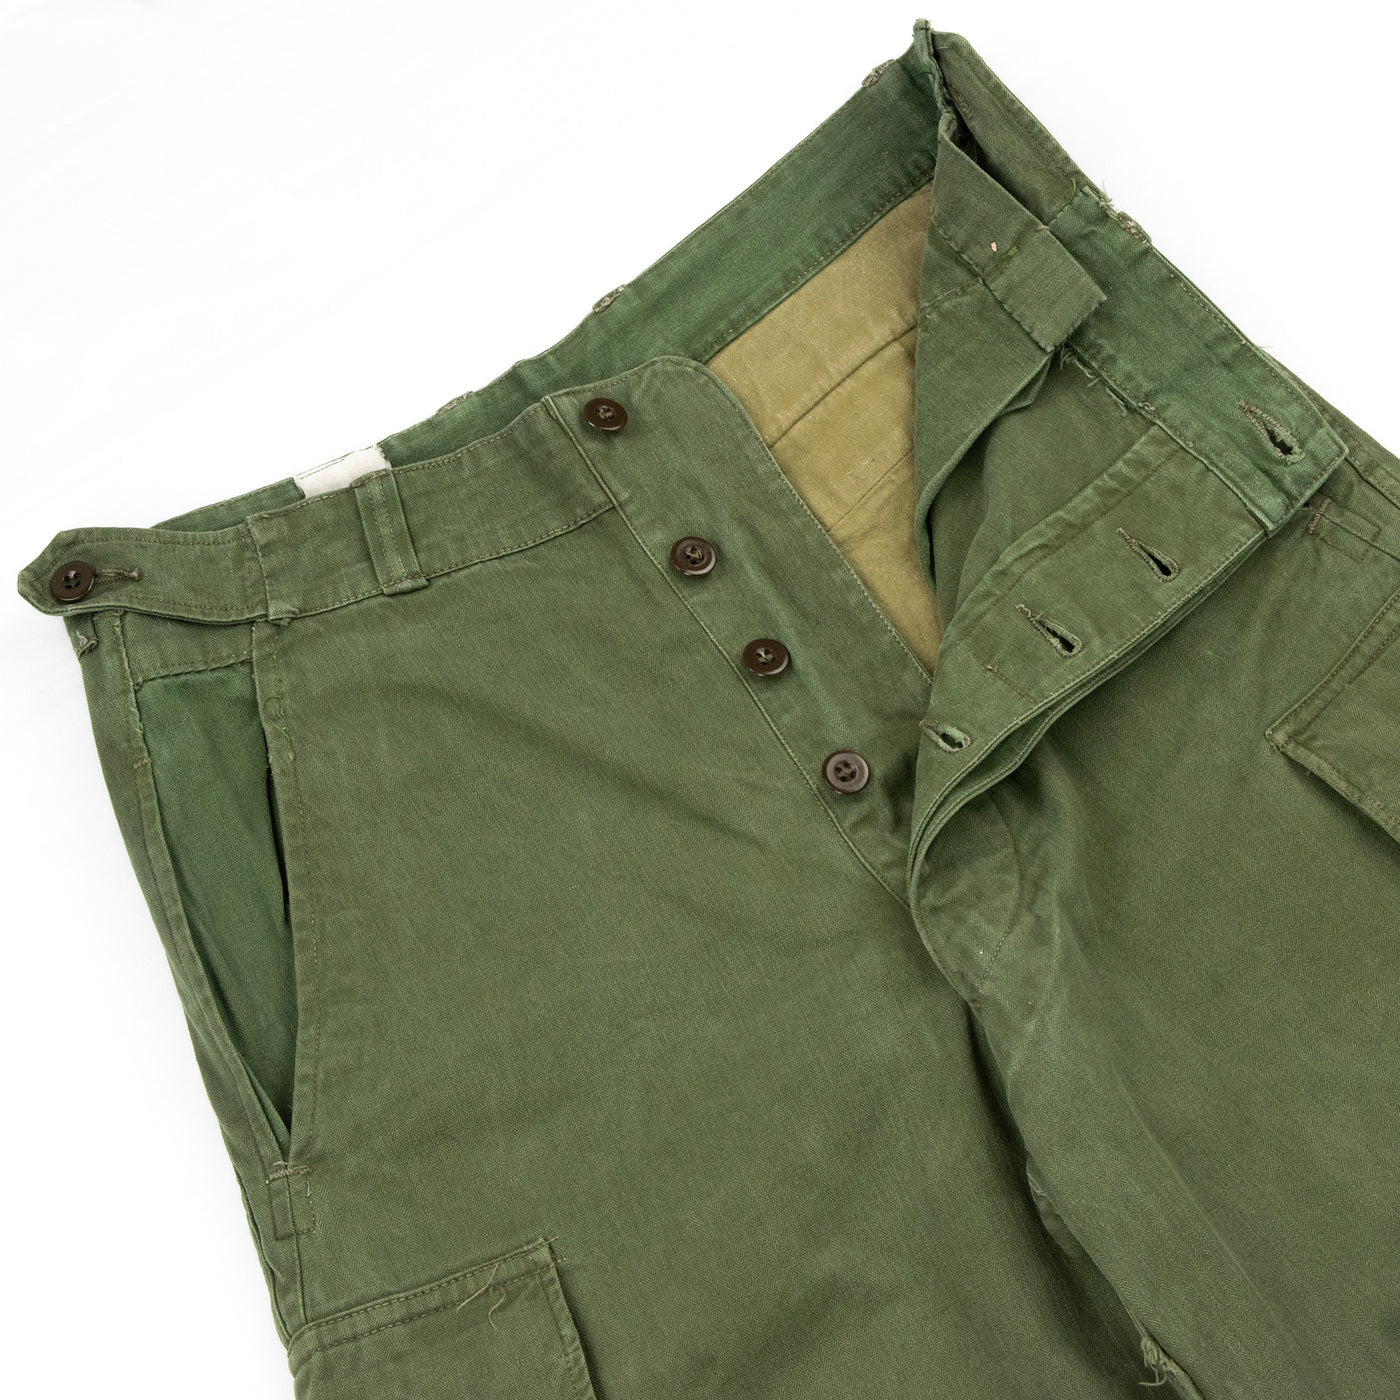 Vintage 1950s French Army M47 HBT Military Cargo Trousers - 30 Front